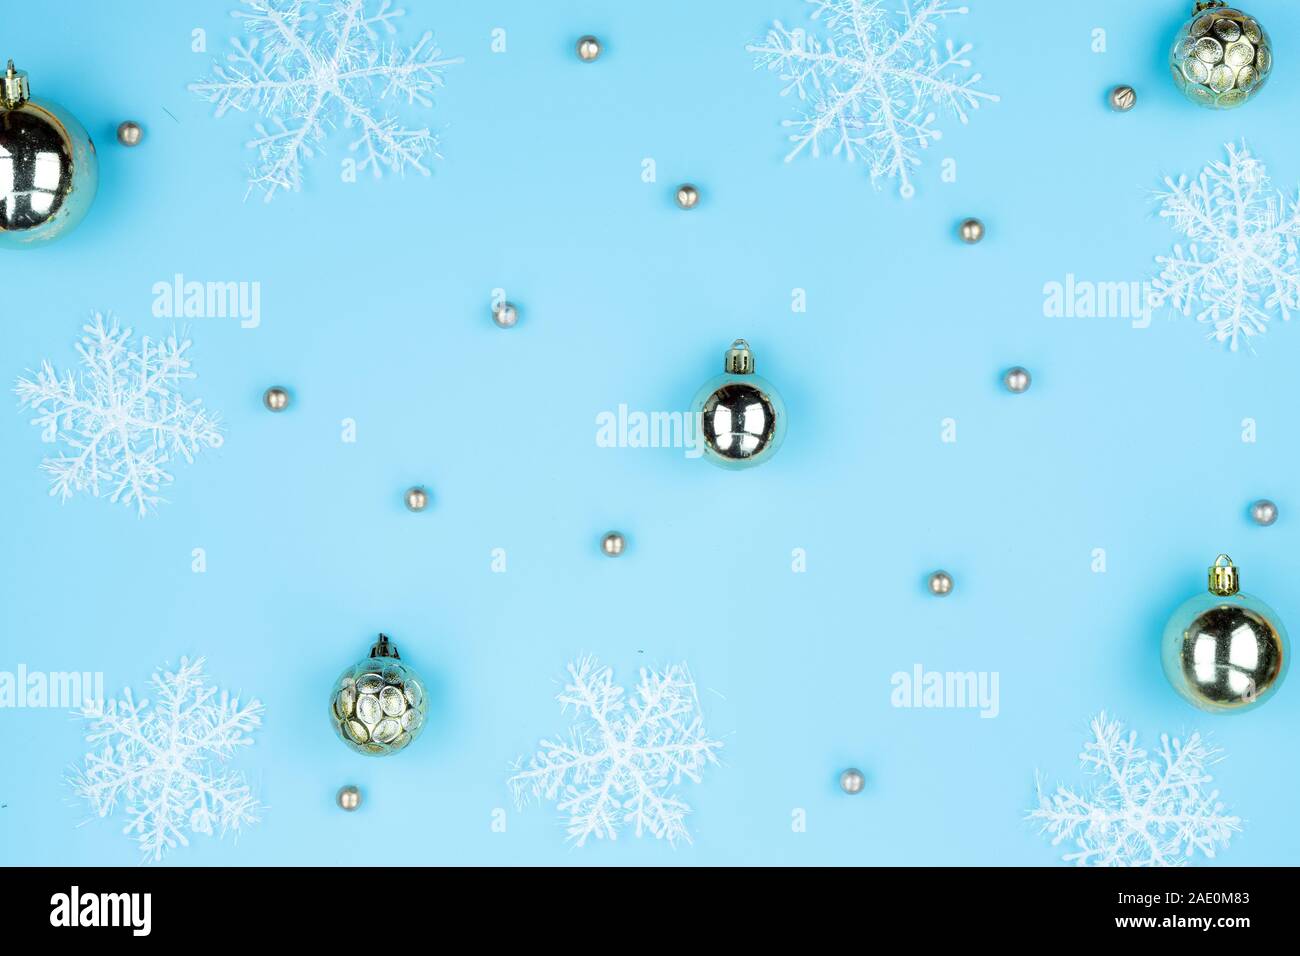 Christmas holidays composition, top view of snowflake decorations on blue background with copy space for text. Flat lay, pattern, winter, postcard tem Stock Photo